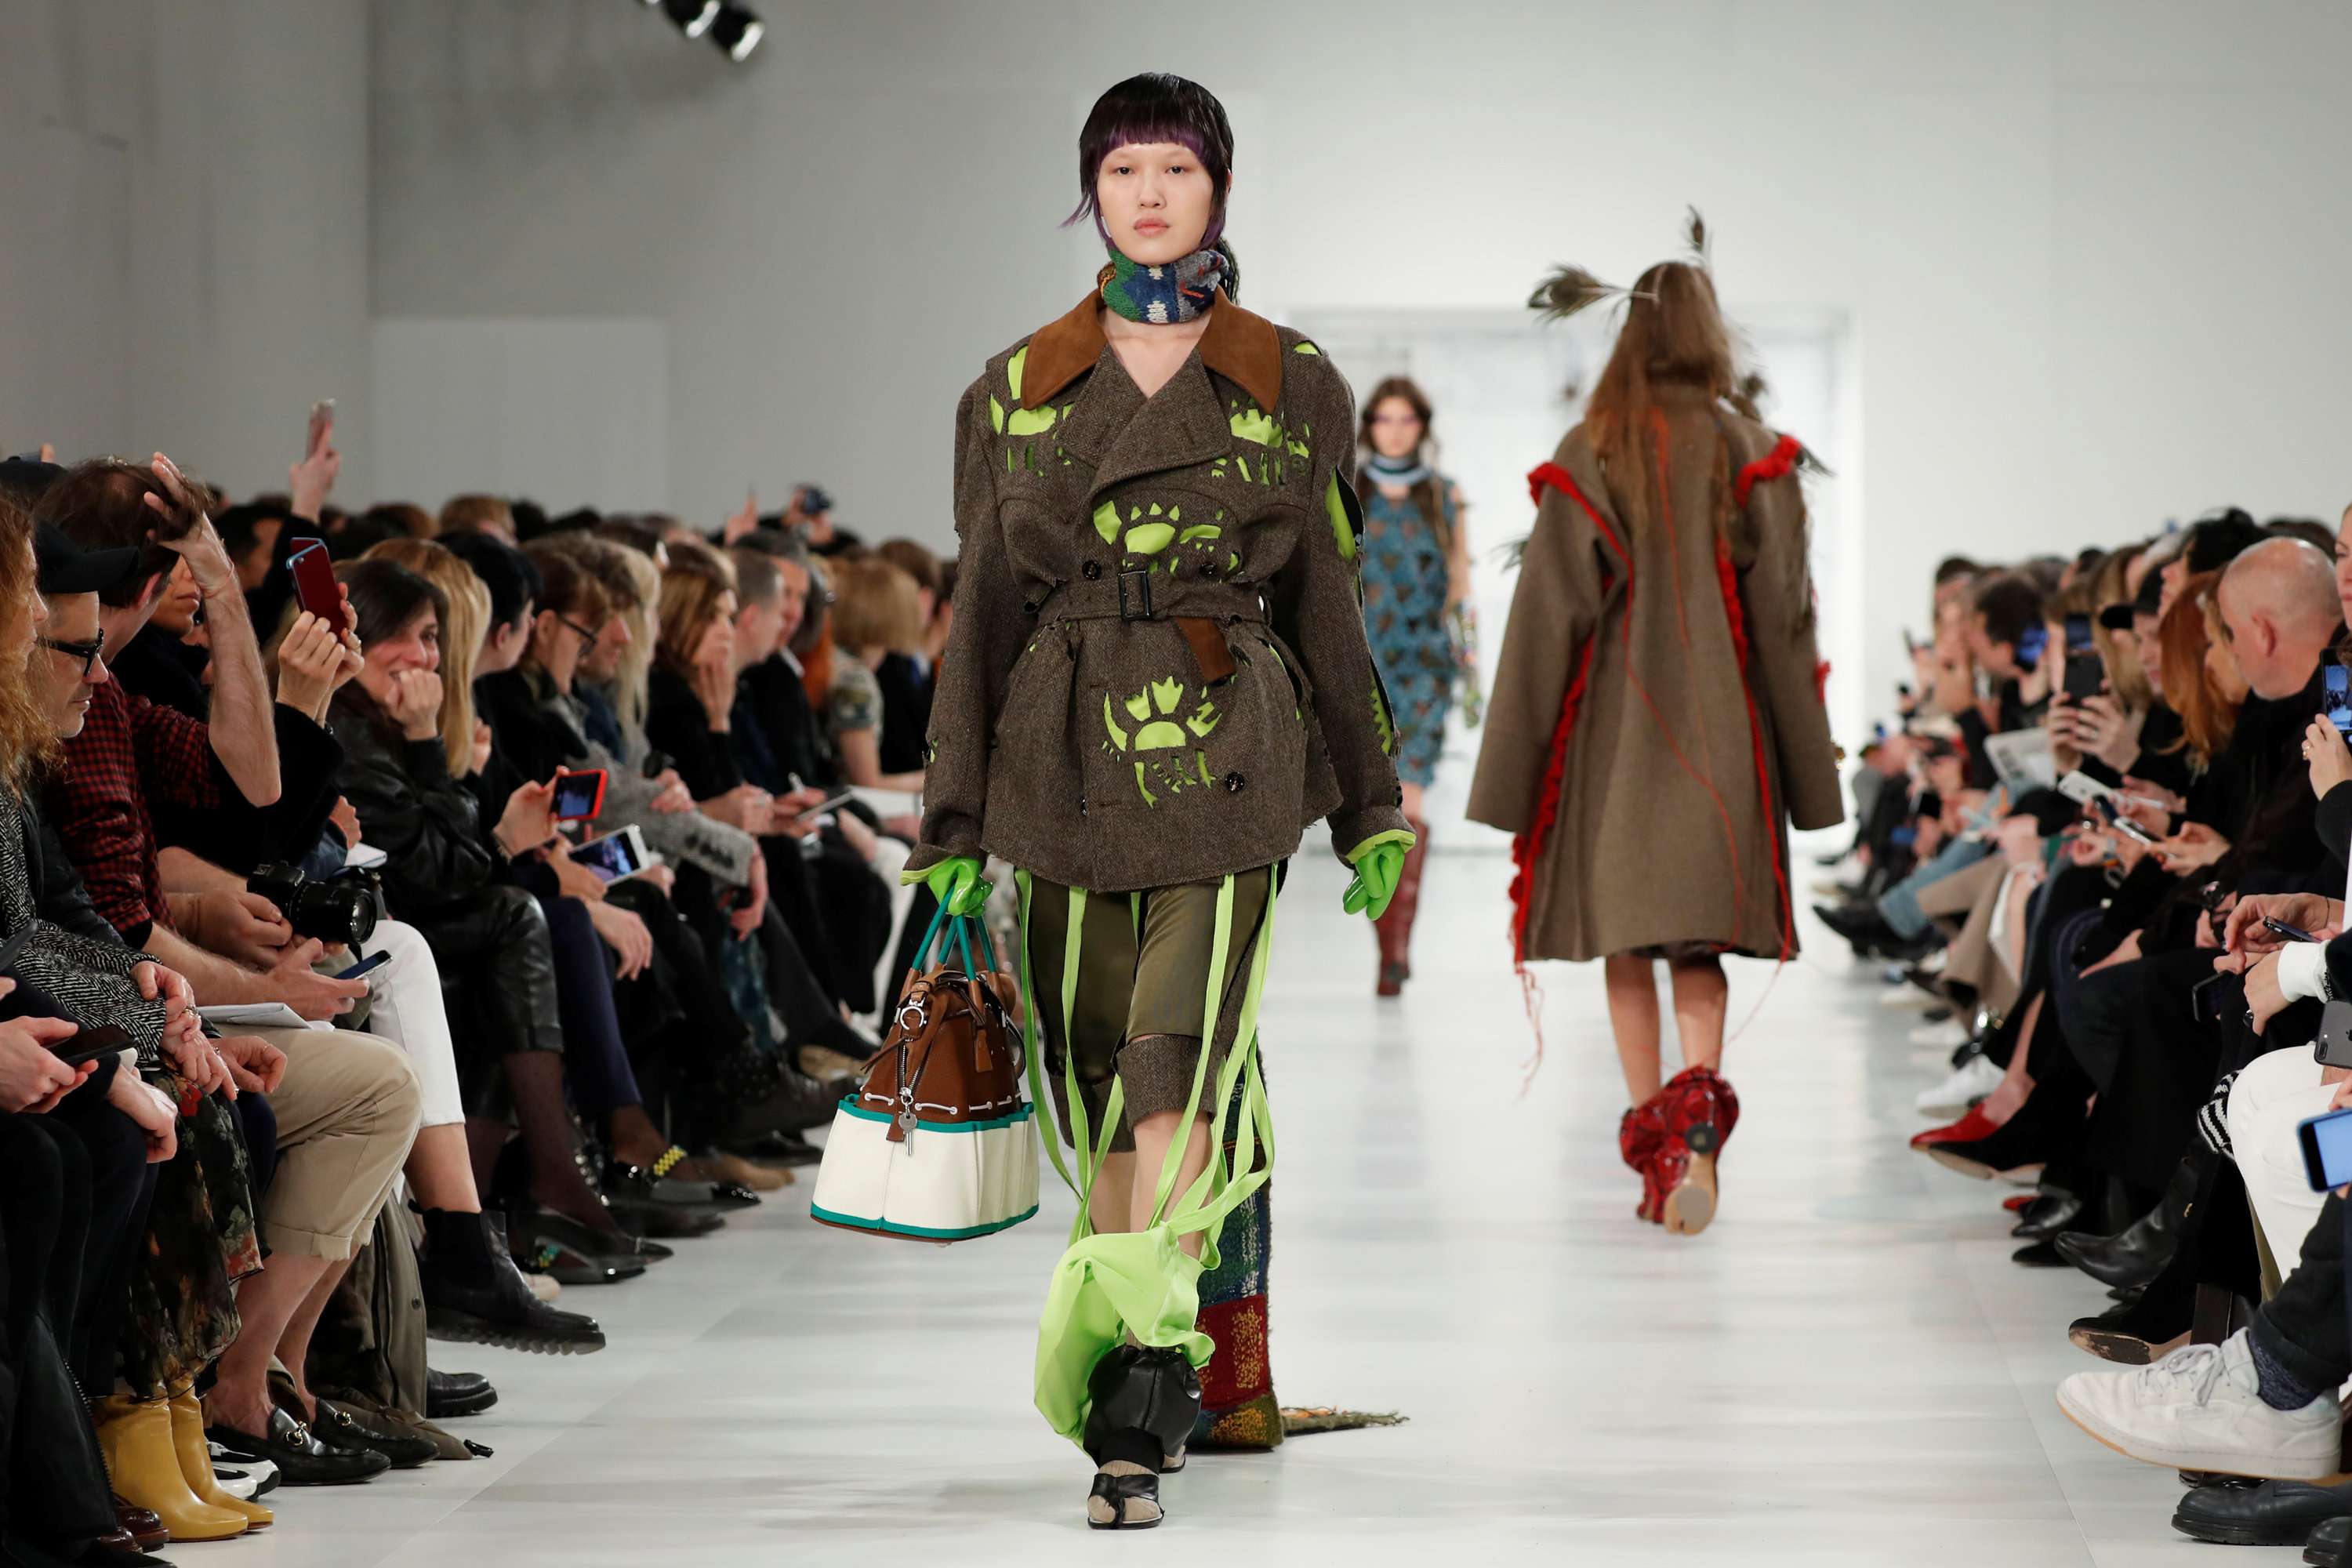 John Galliano’s collection for Maison Margiela featured some eccentric looks. Photo: Reuters